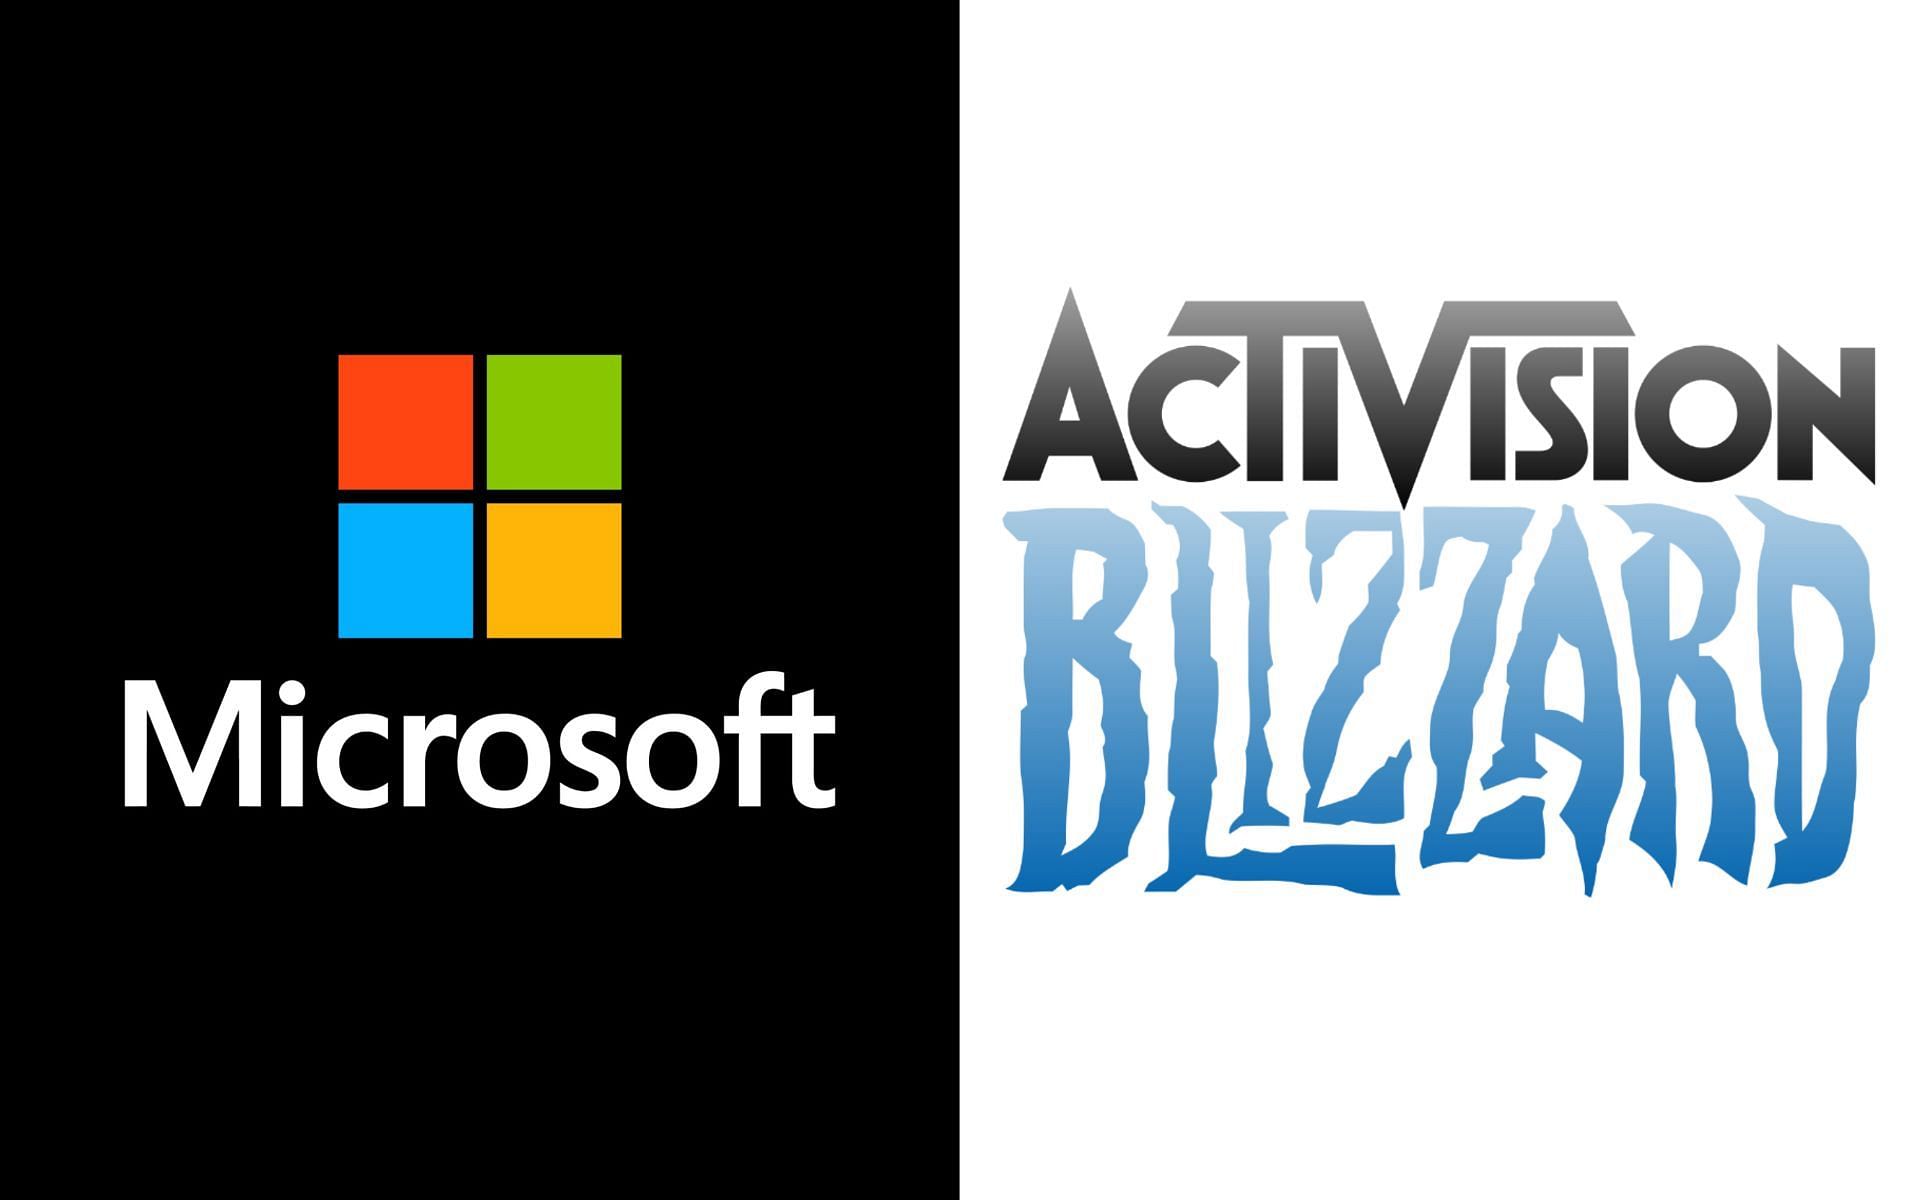 Major insights in Microsoft and Activision